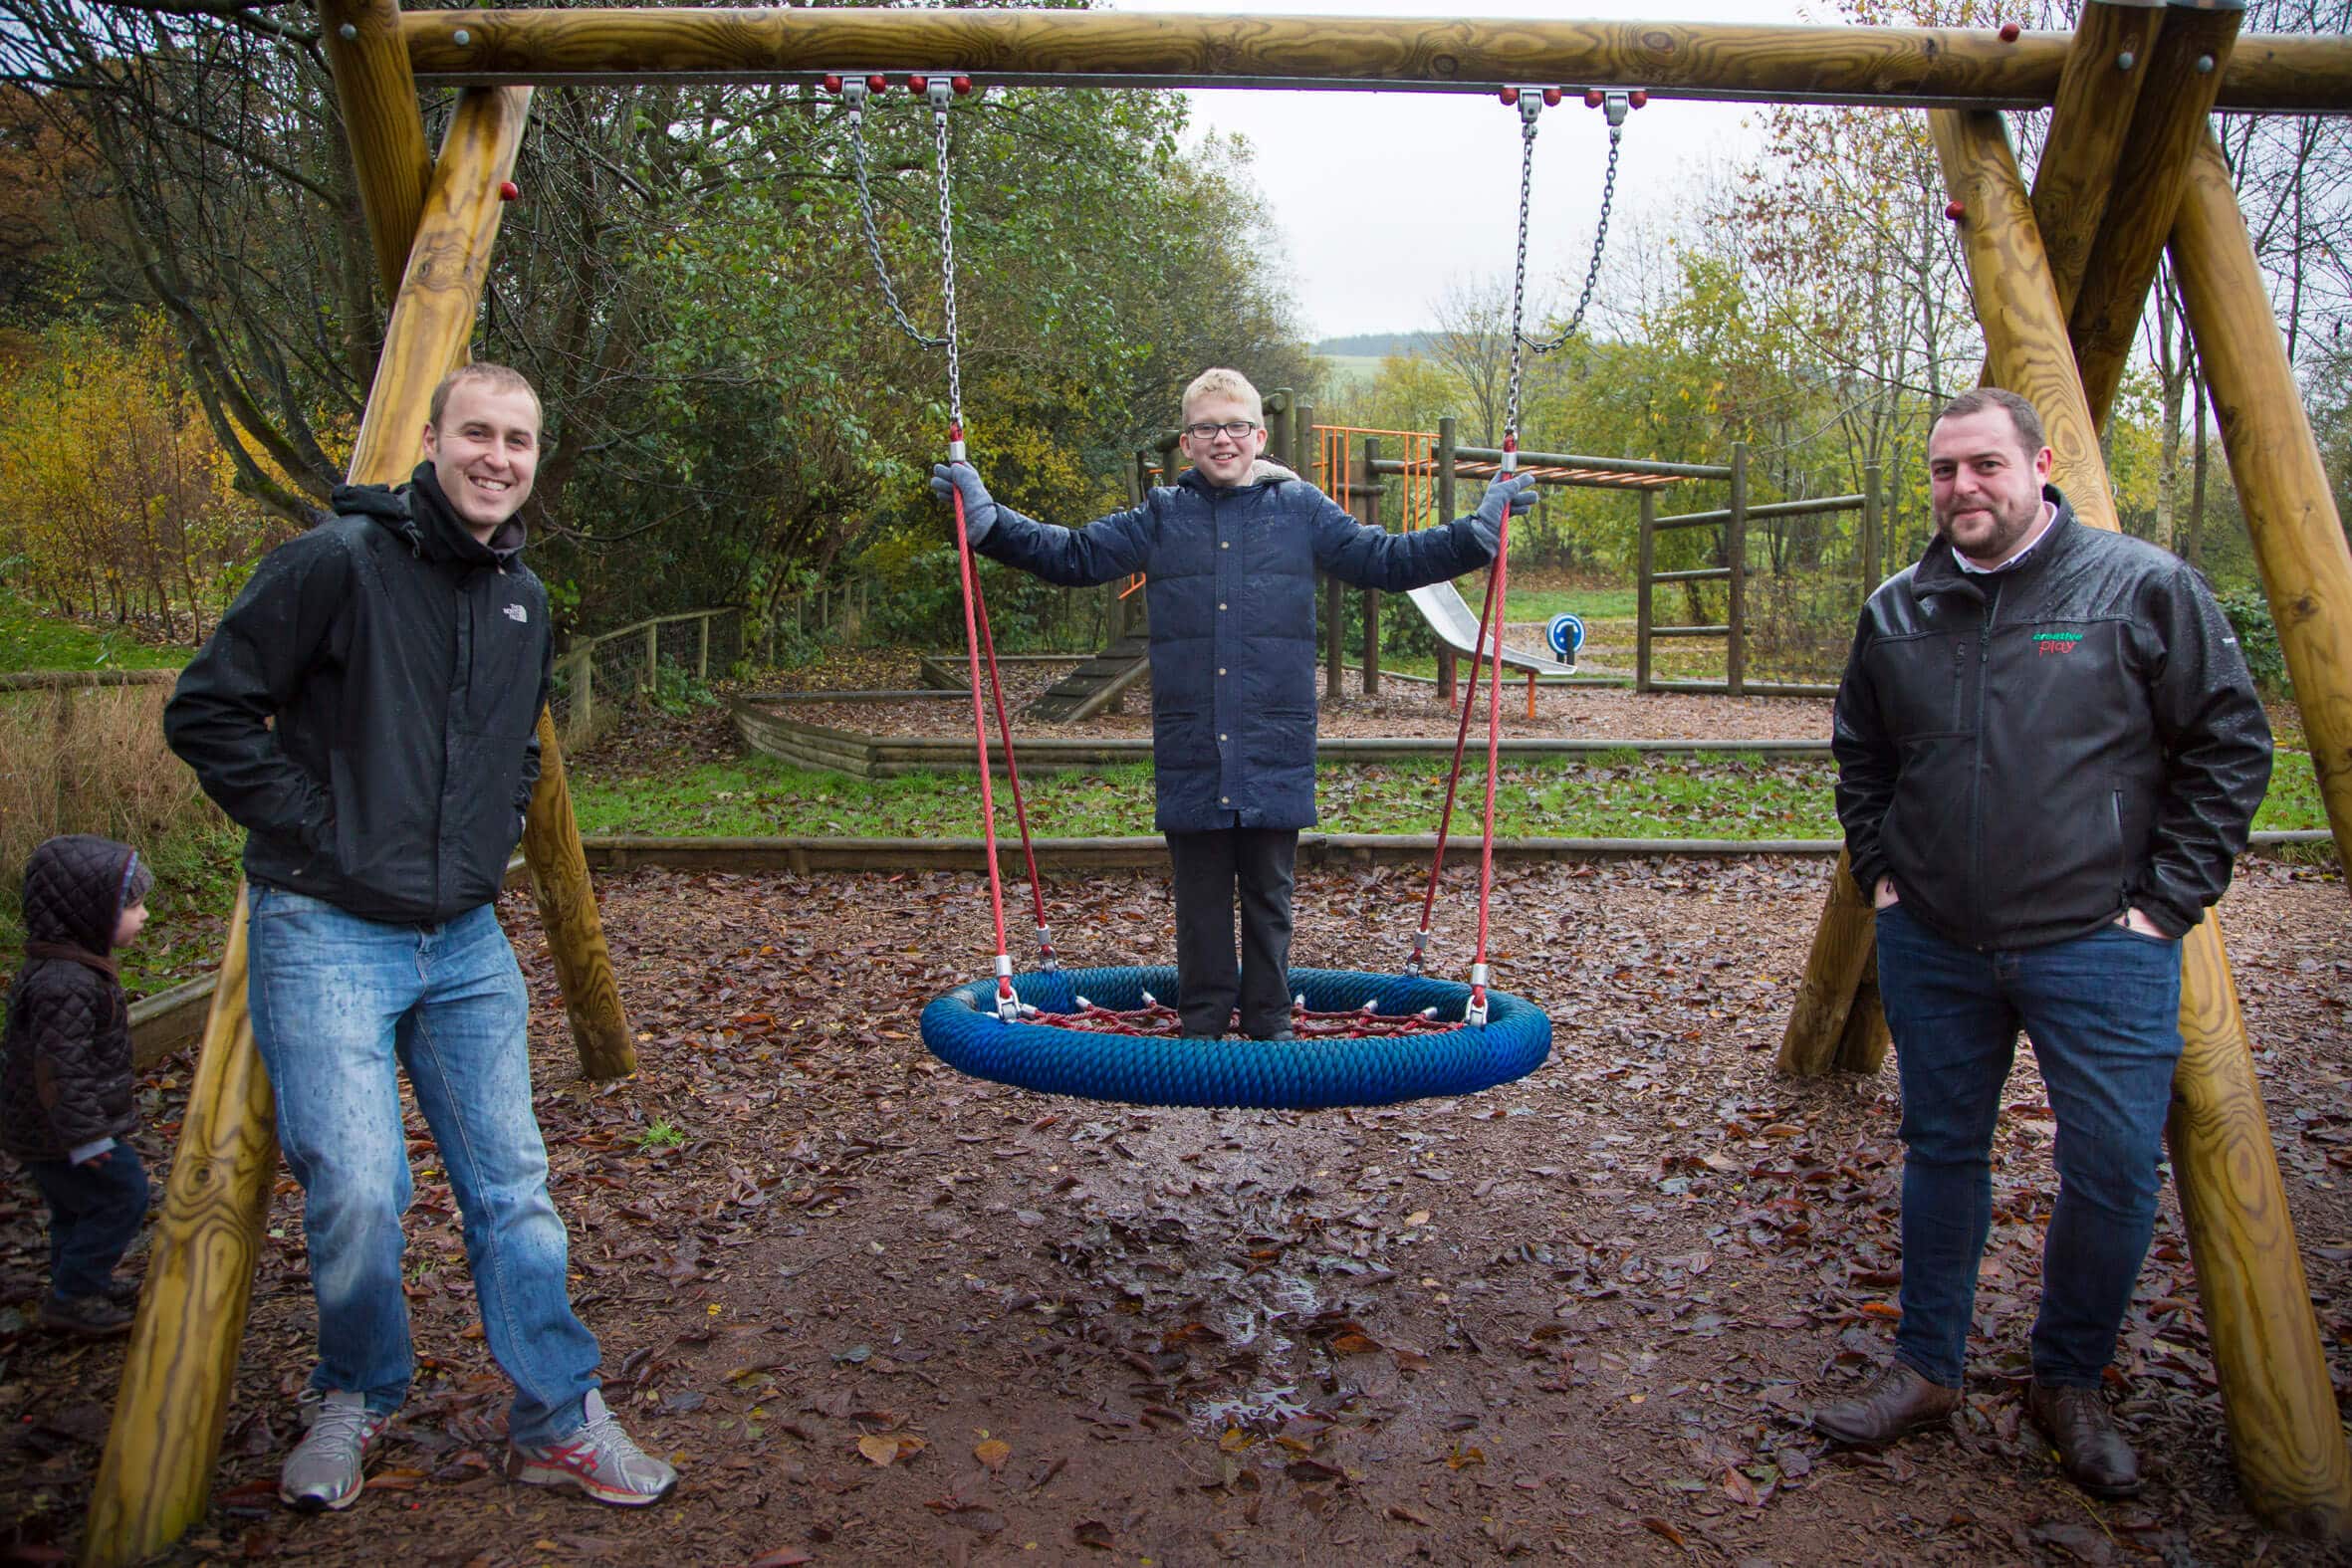 Jack Roberts, 10 Who Officially Opened The New Playground In Llanferres Pictured With Gareth Jaggard, Secreatary Of The Playing Field Association And Rob Williams Sales Manager From Creative Play.